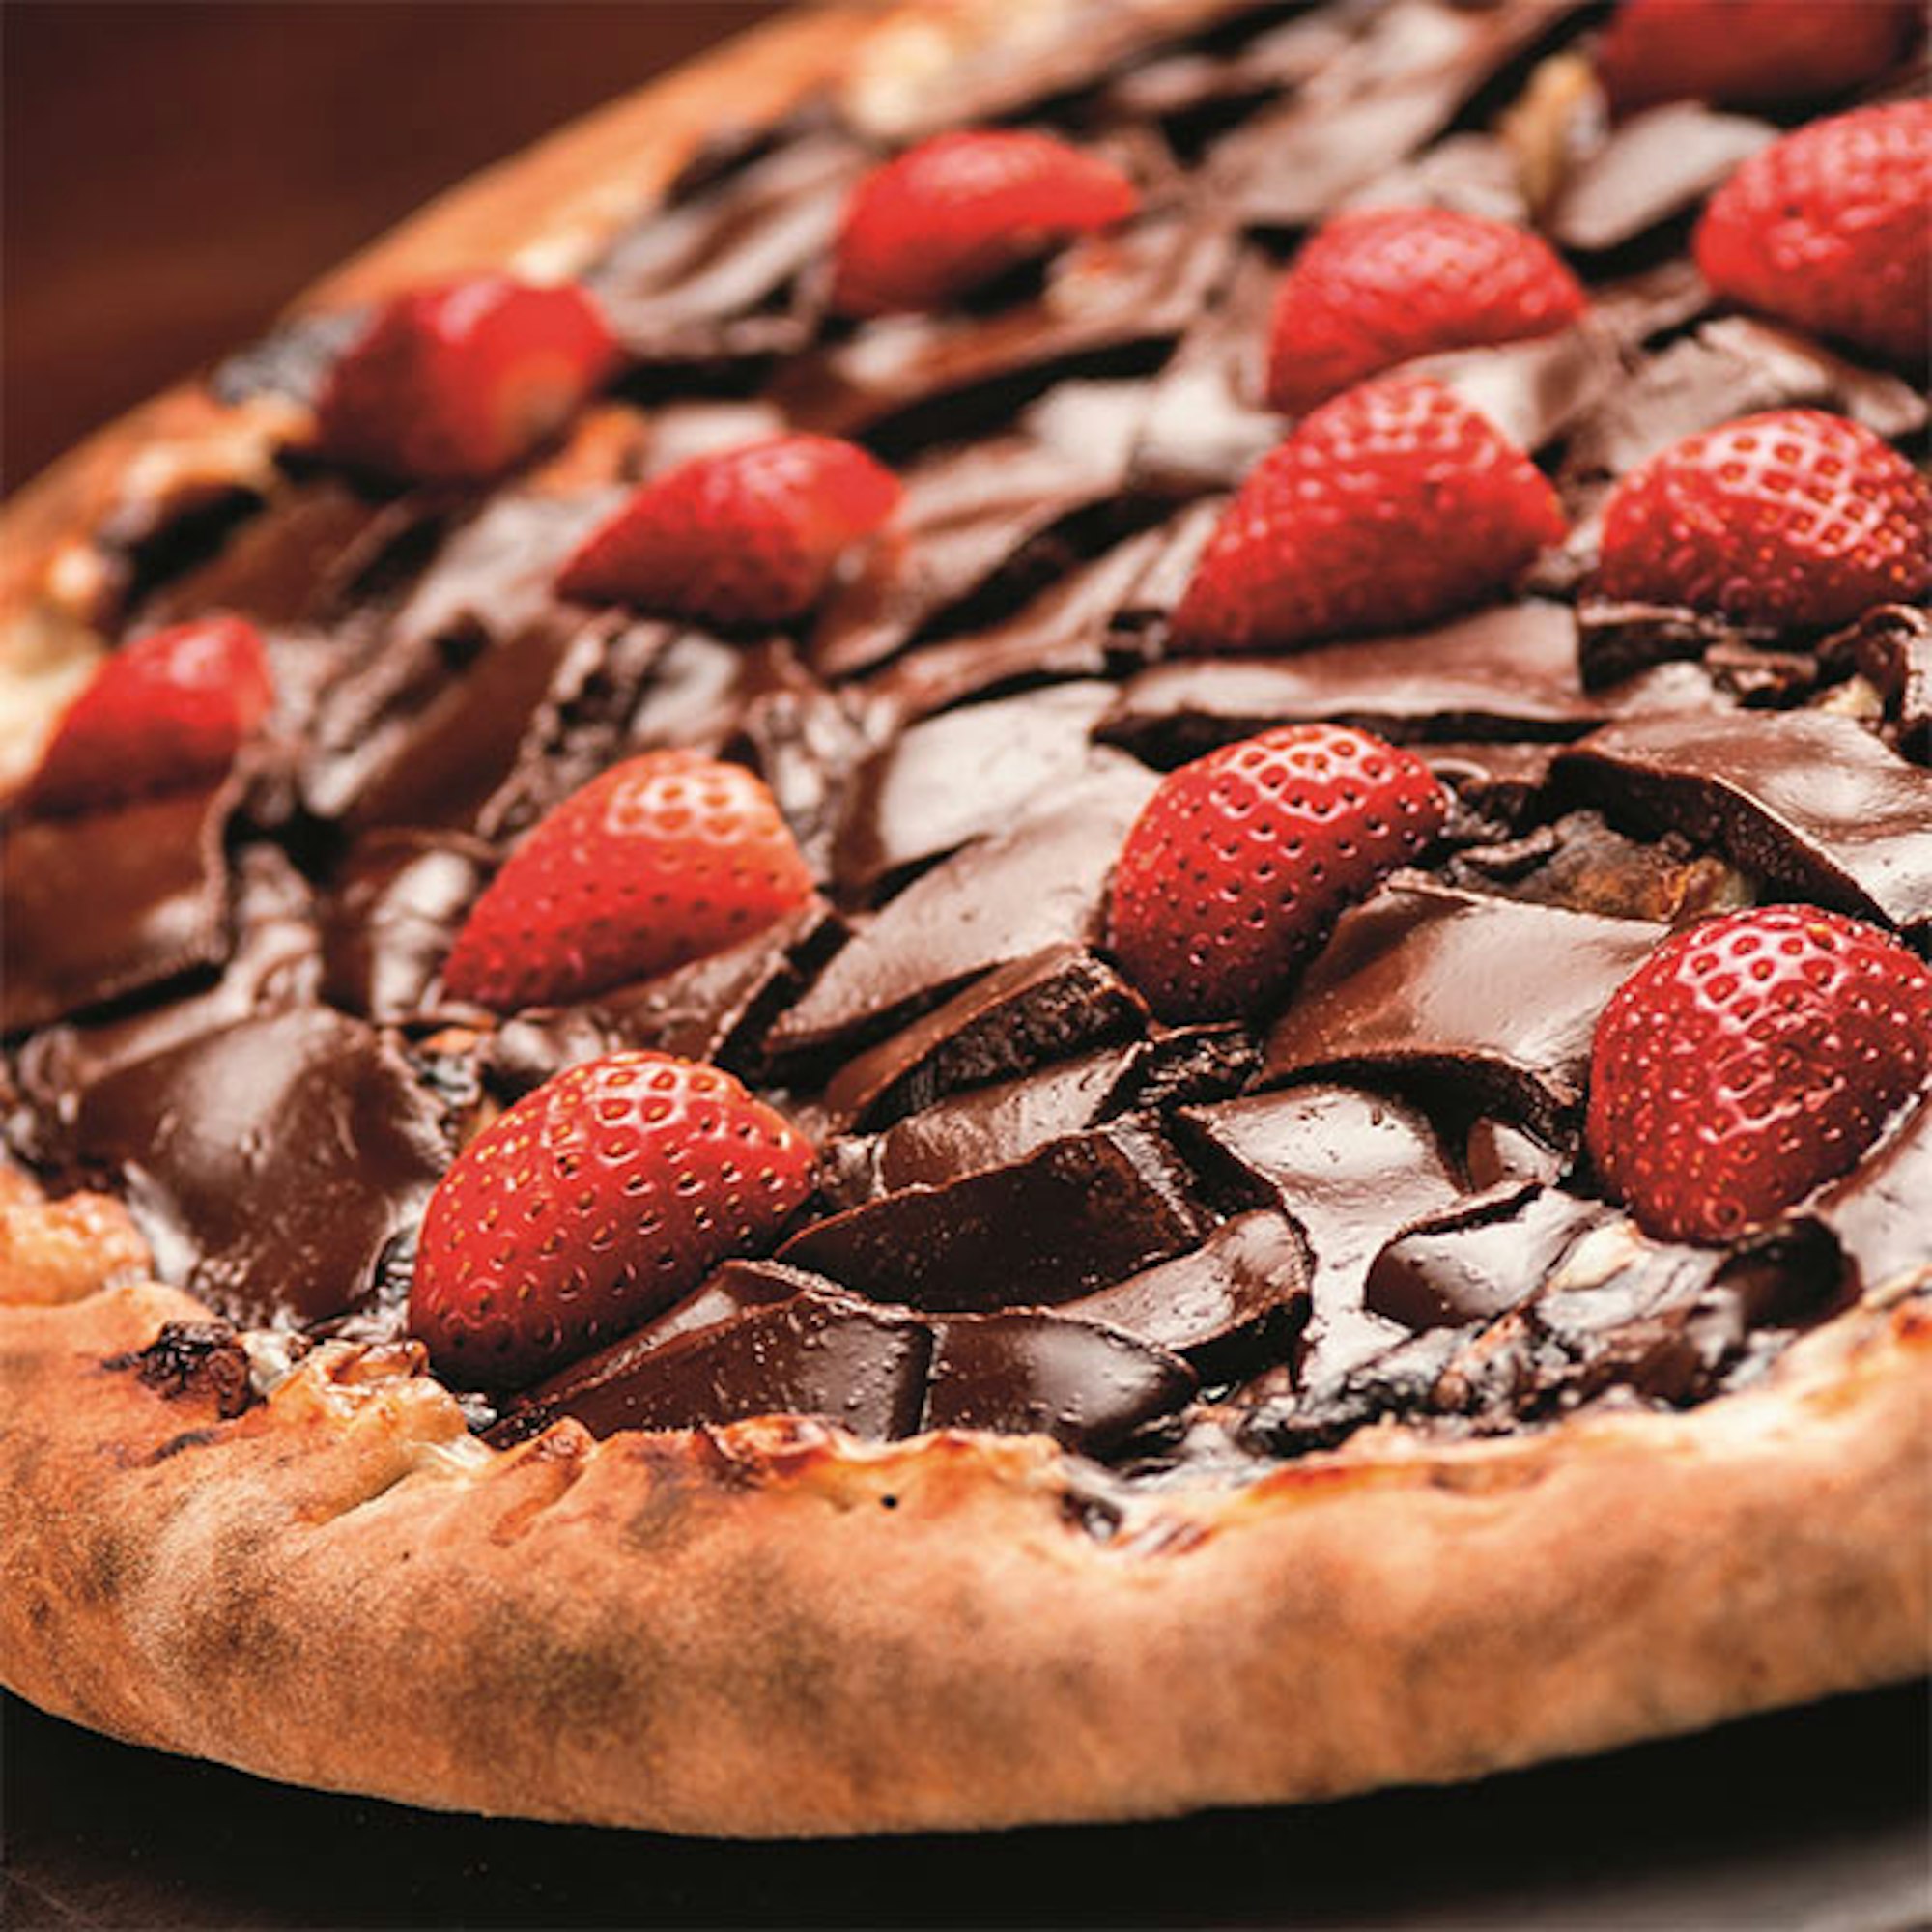 Nutella and Strawberry Dessert Pizza recipe using Baccarat The Gourmet Slice Pizza Oven.